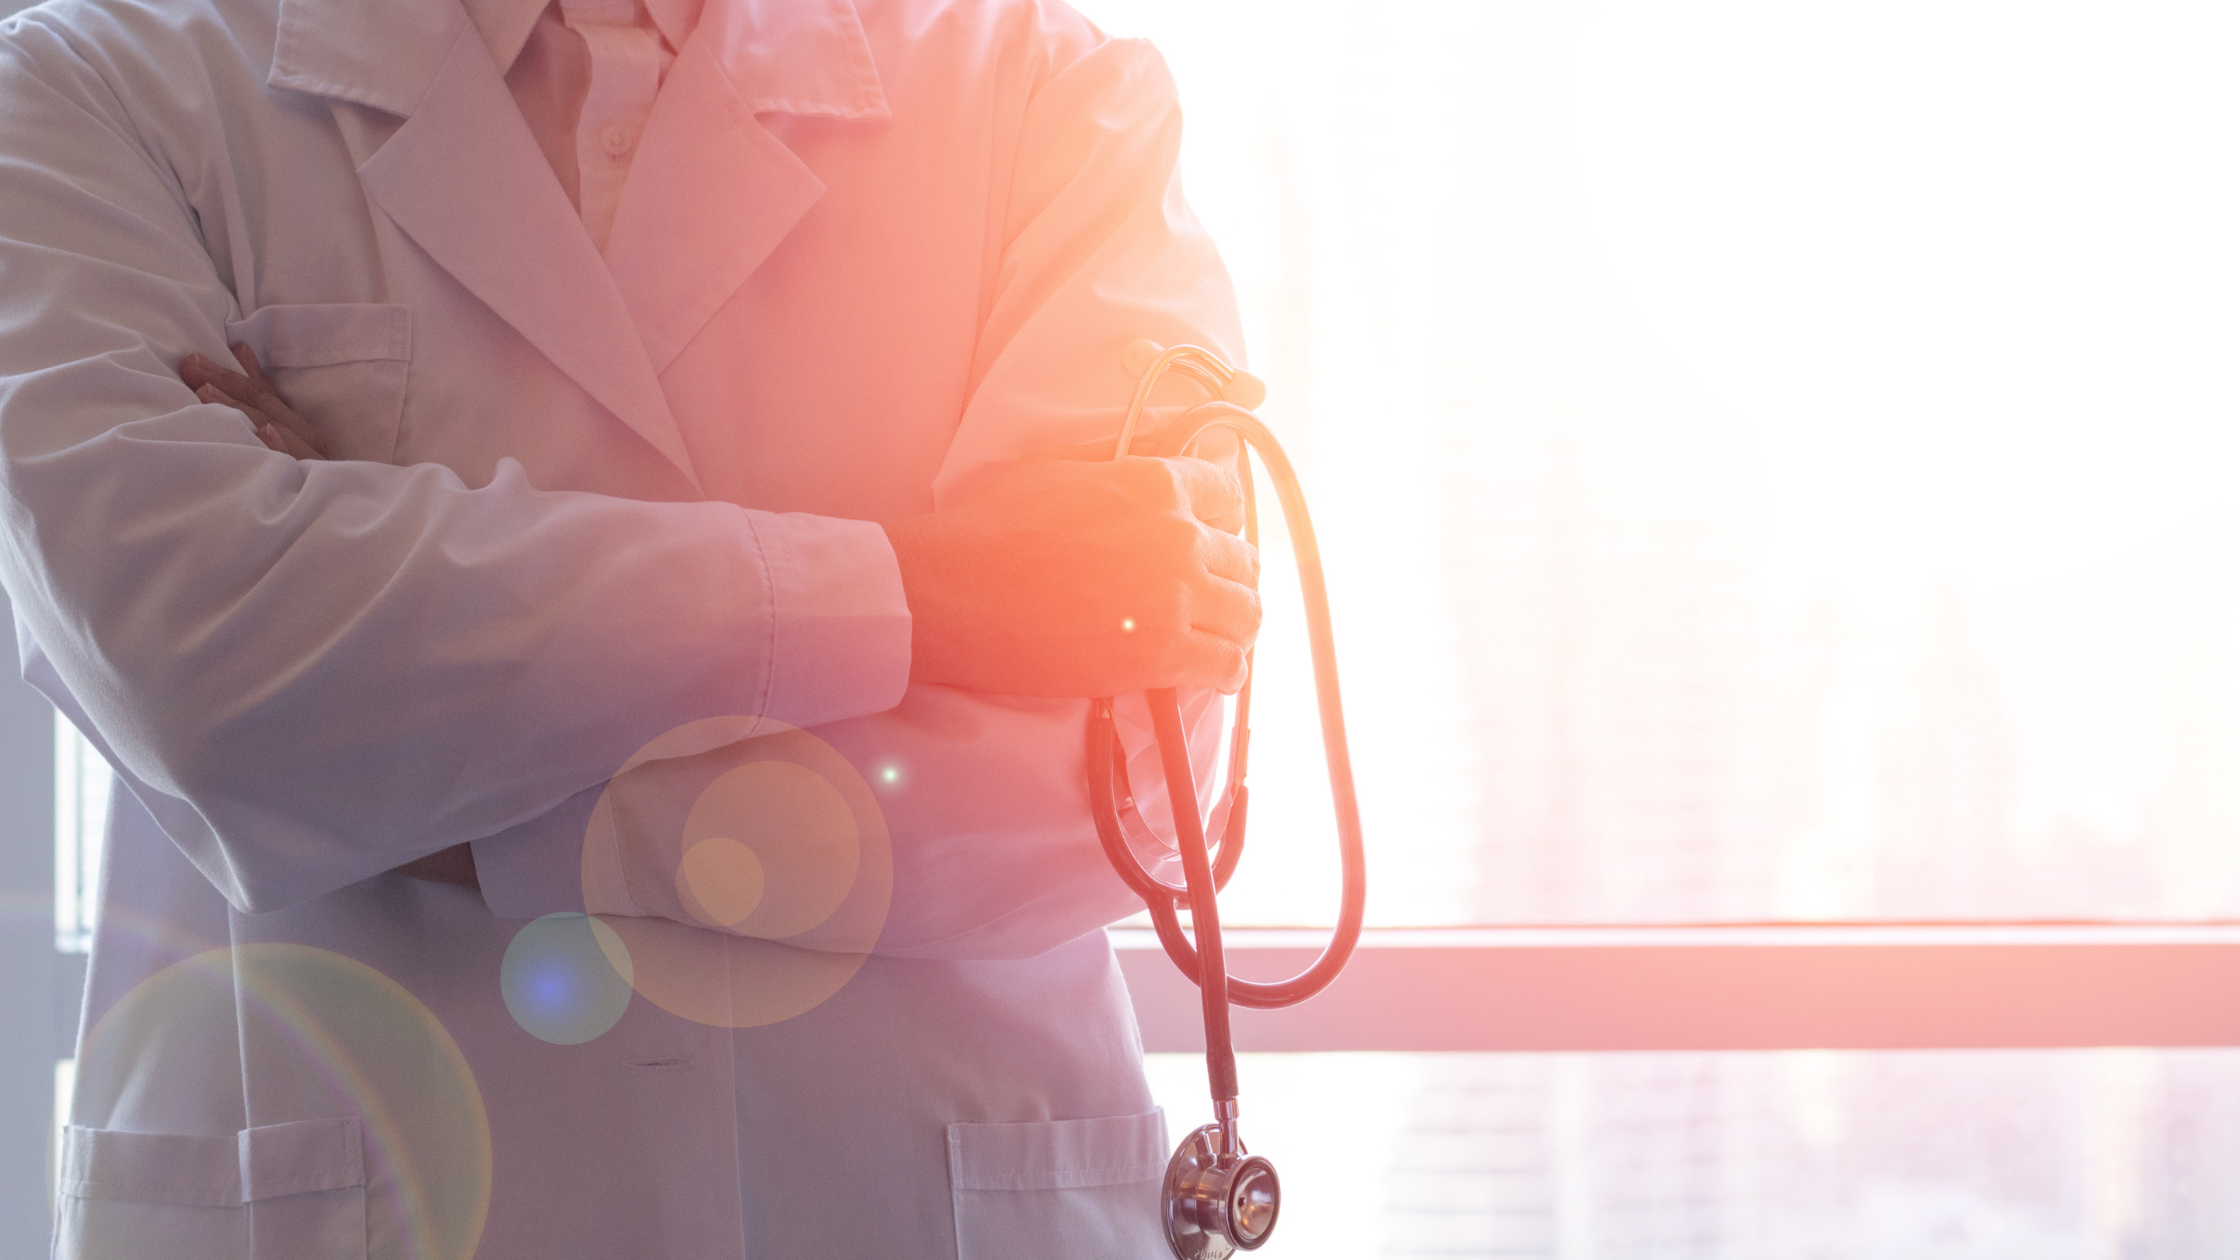 Close up of doctor’s crossed arms holding a stethoscope and wearing a white lab coat